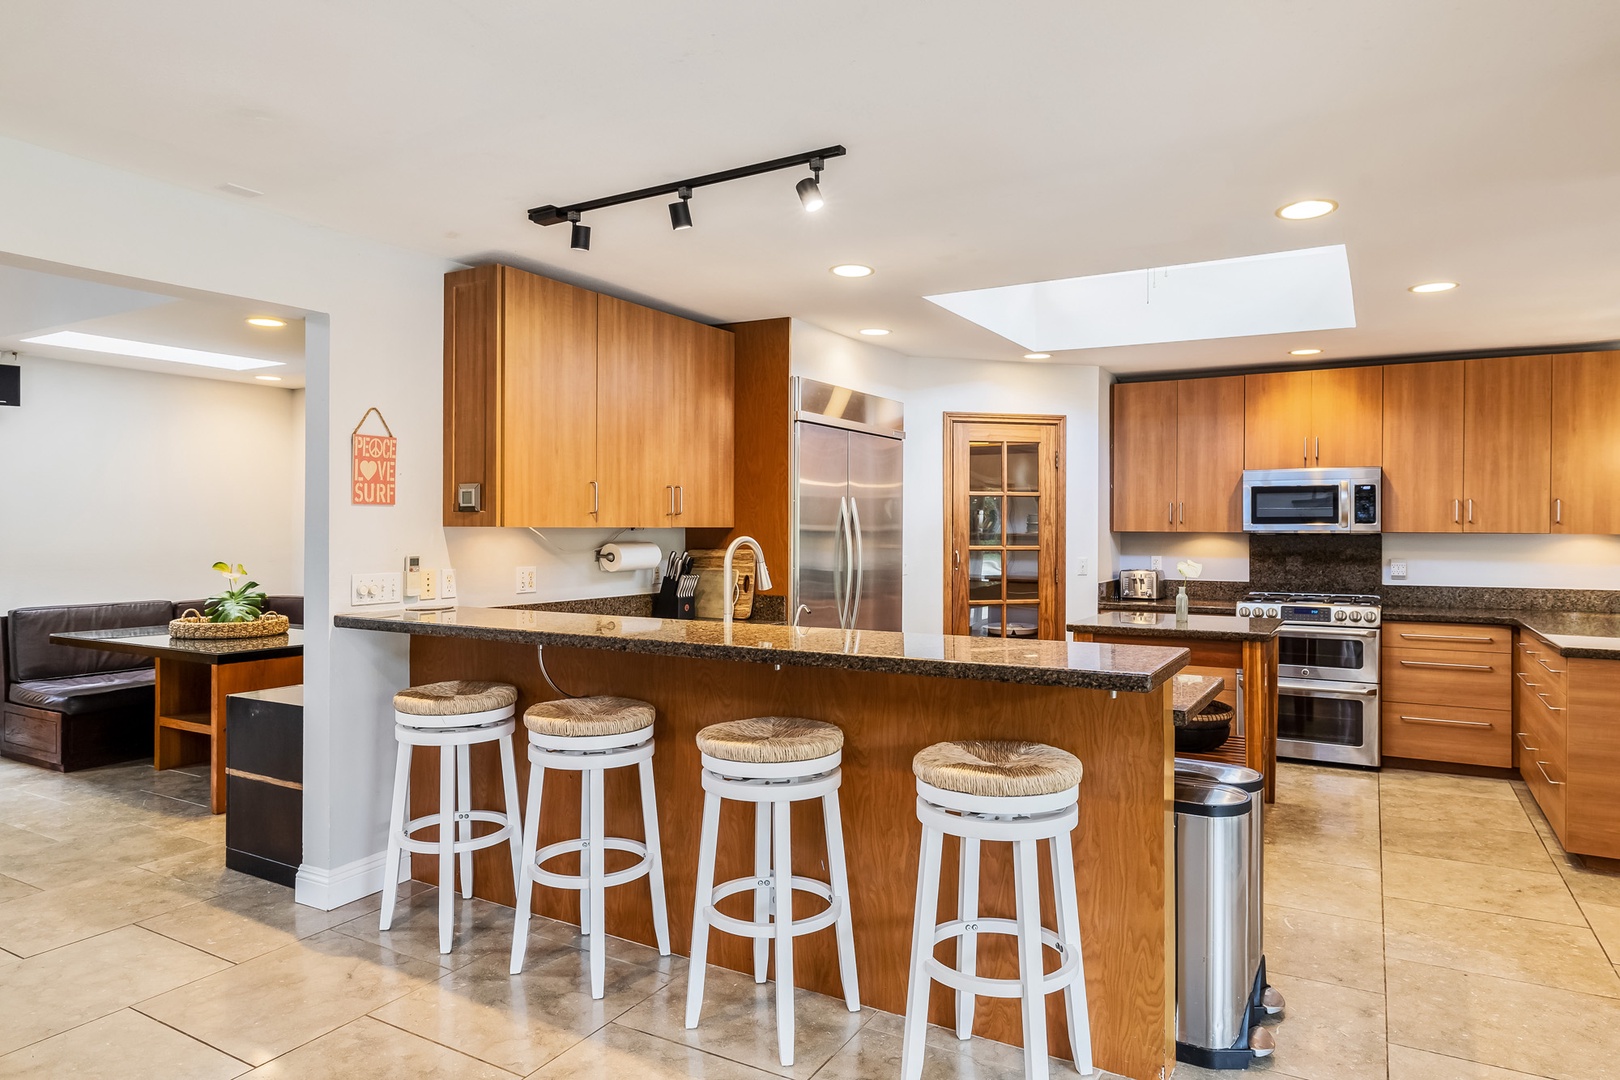 Honolulu Vacation Rentals, Hale Ho'omaha - There's breakfast bar seating in the kitchen